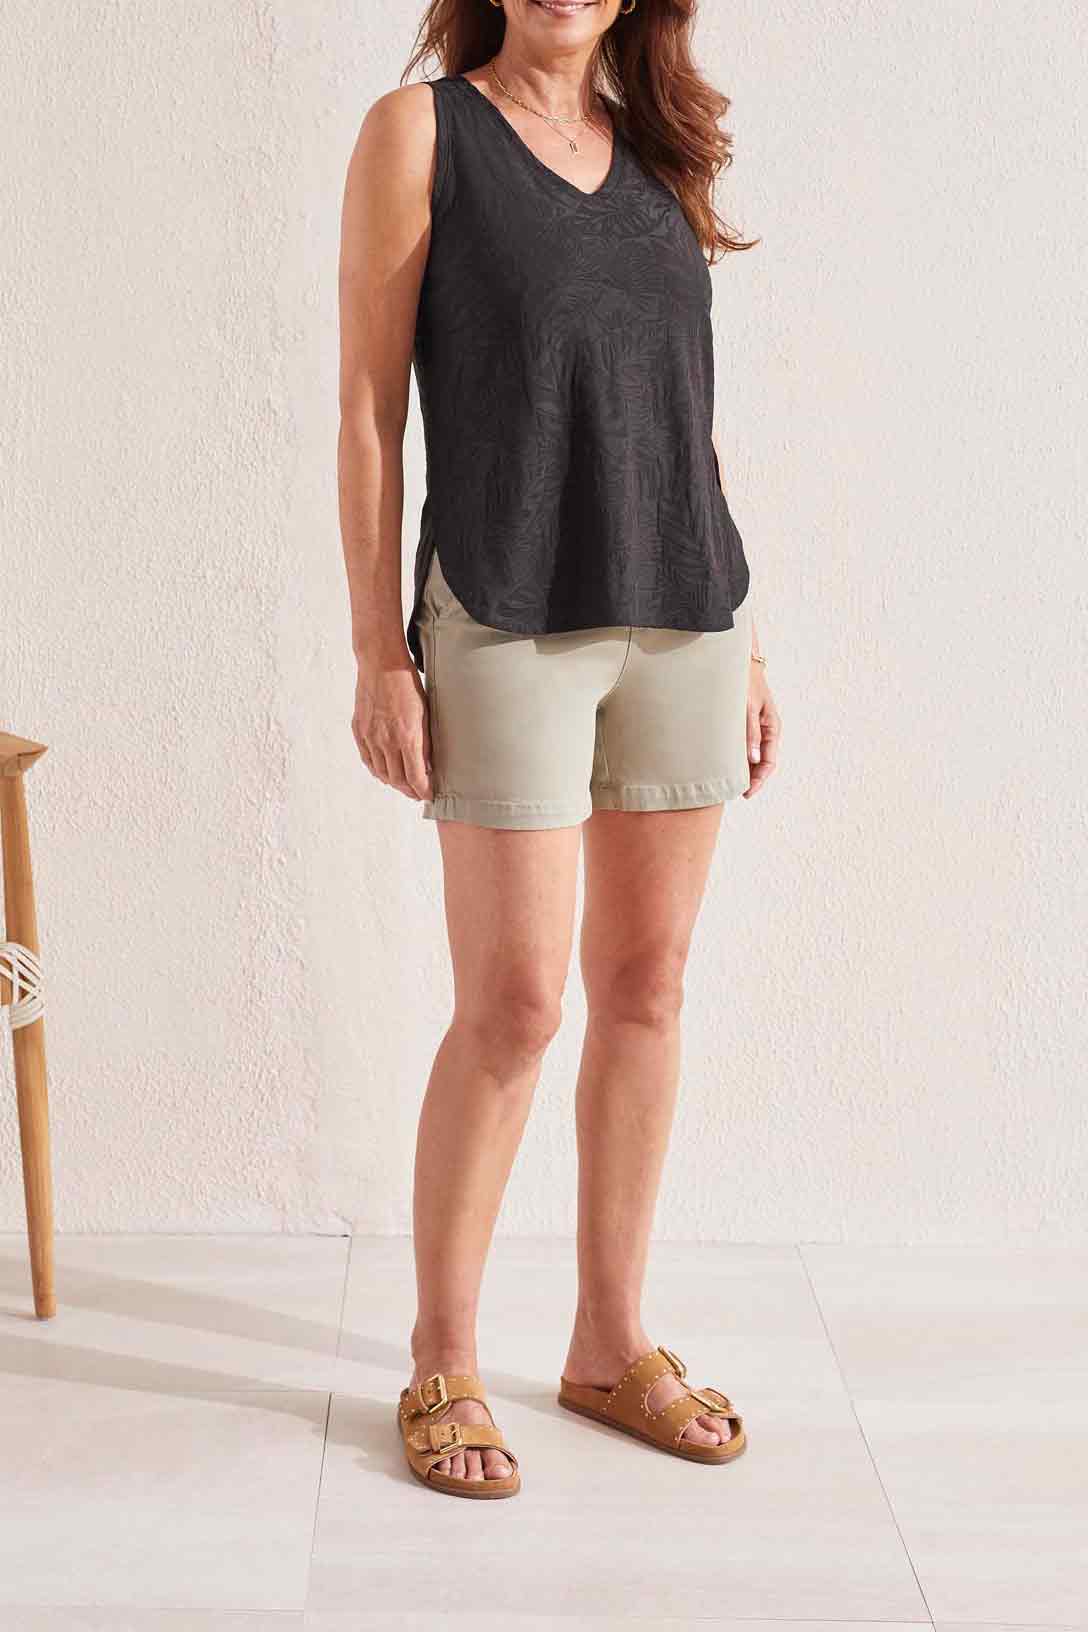 Woman smiling while wearing a stylish sleeveless Tribal V-Neck Tank Top with Curved Hem and beige pants.